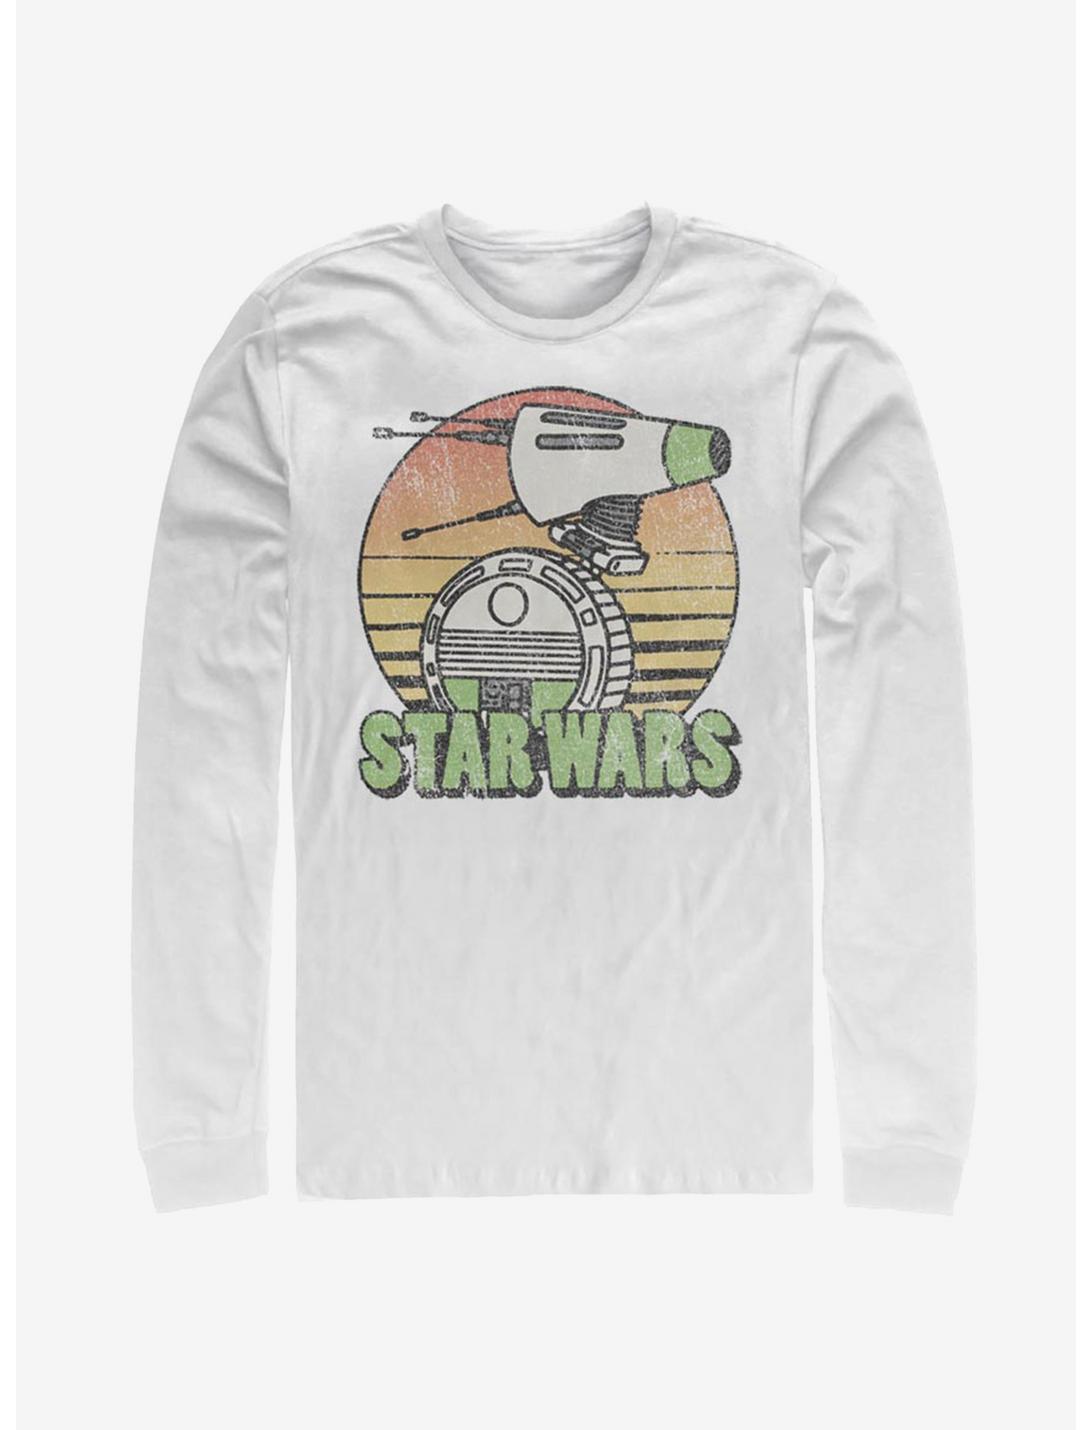 Star Wars: The Rise of Skywalker Just D-O It Long-Sleeve T-Shirt, WHITE, hi-res